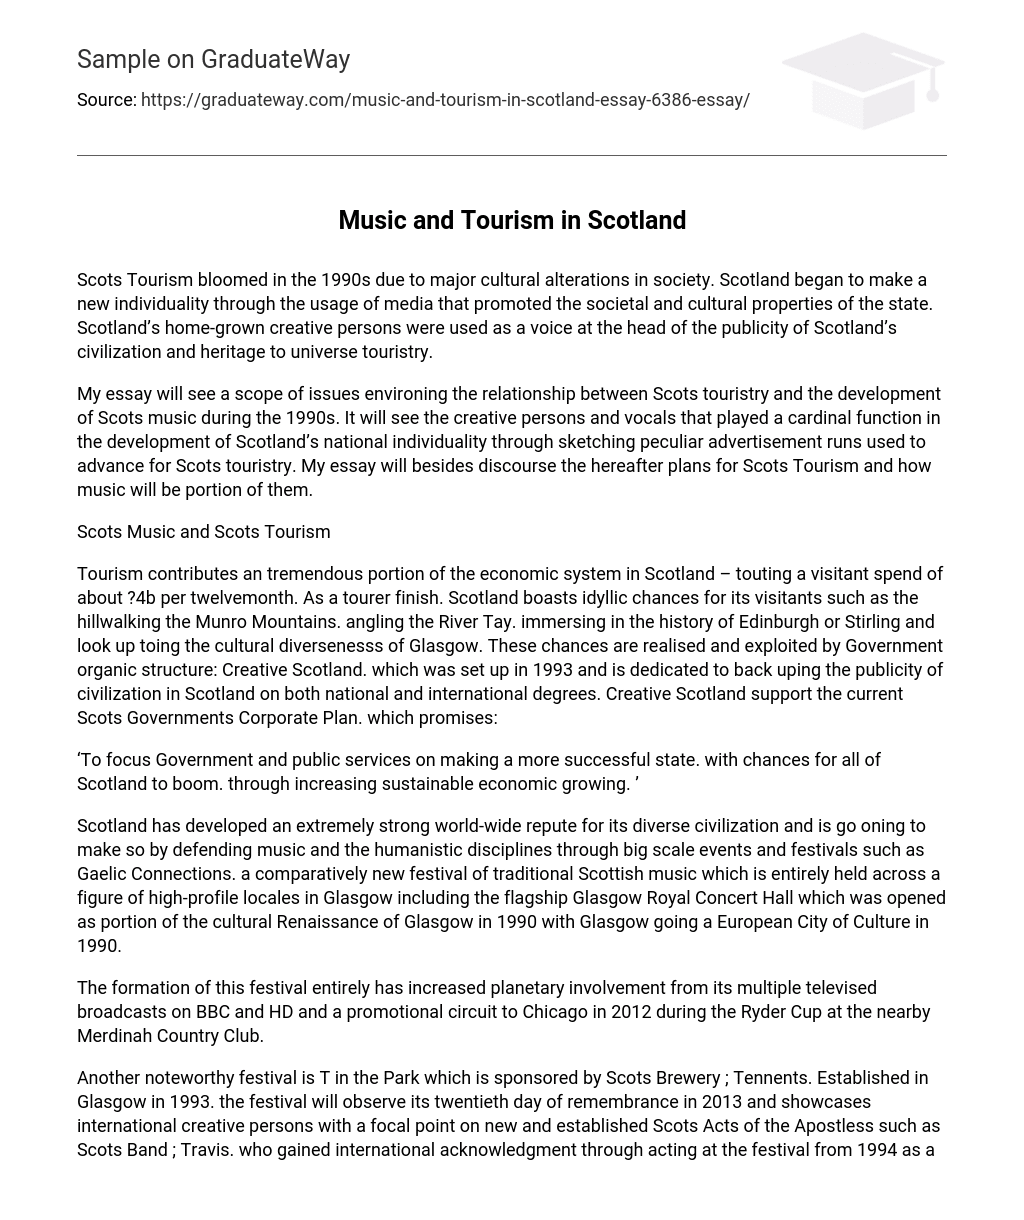 Music and Tourism in Scotland